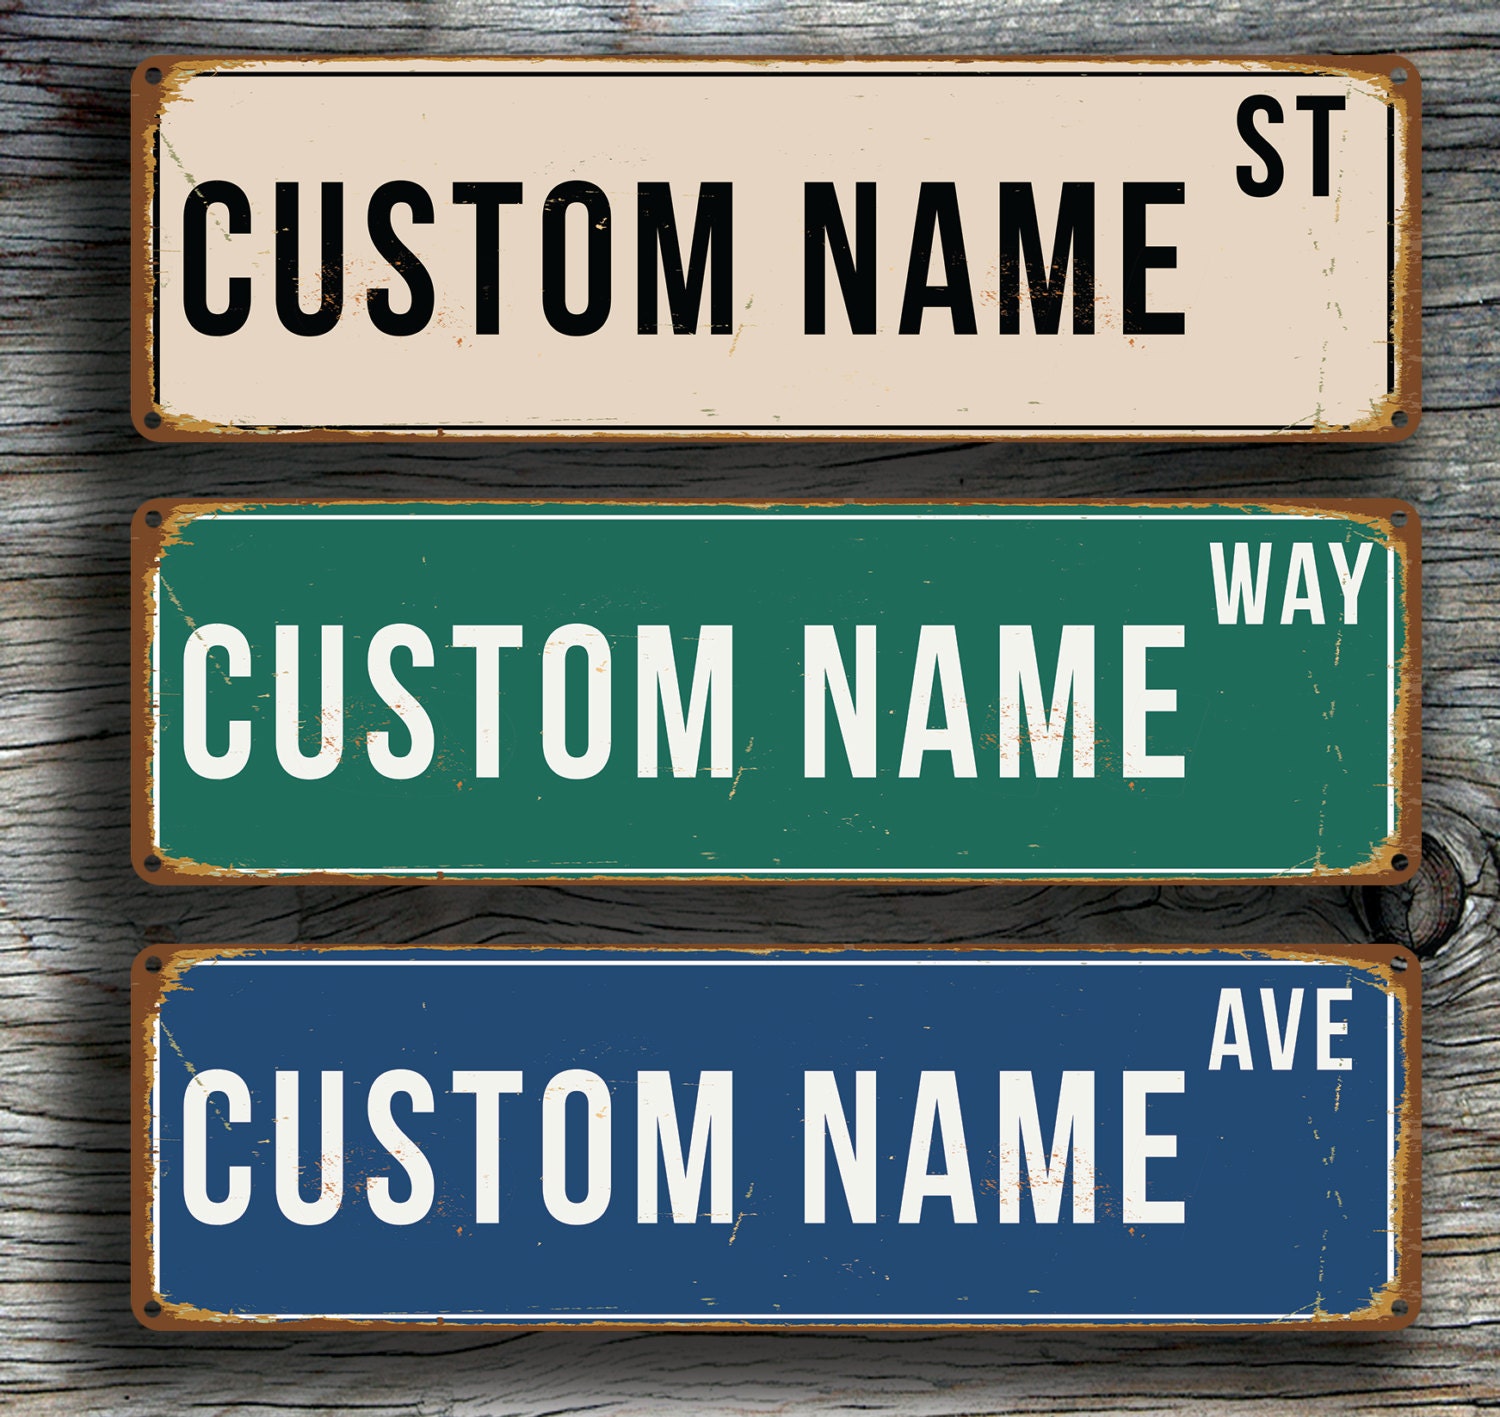 Albums 103+ Pictures Pictures Of Street Signs Full HD, 2k, 4k 09/2023